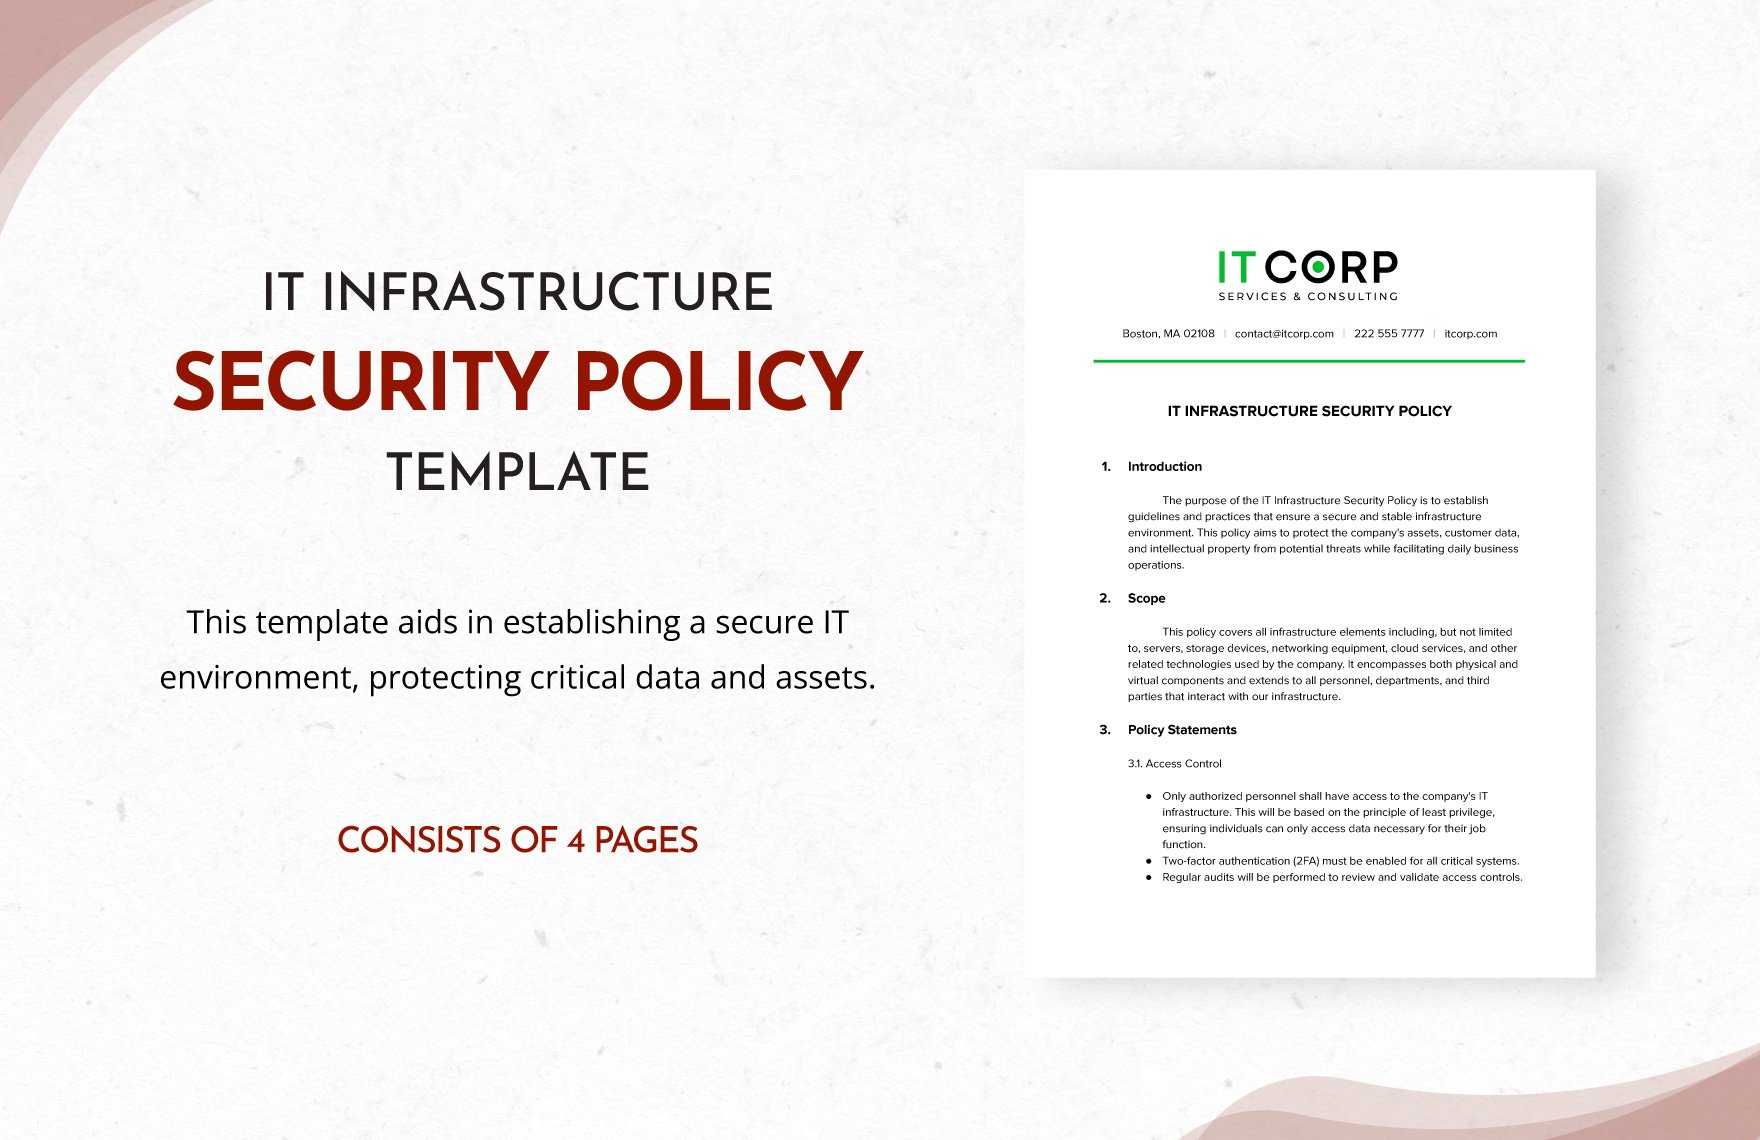 IT Infrastructure Security Policy Template